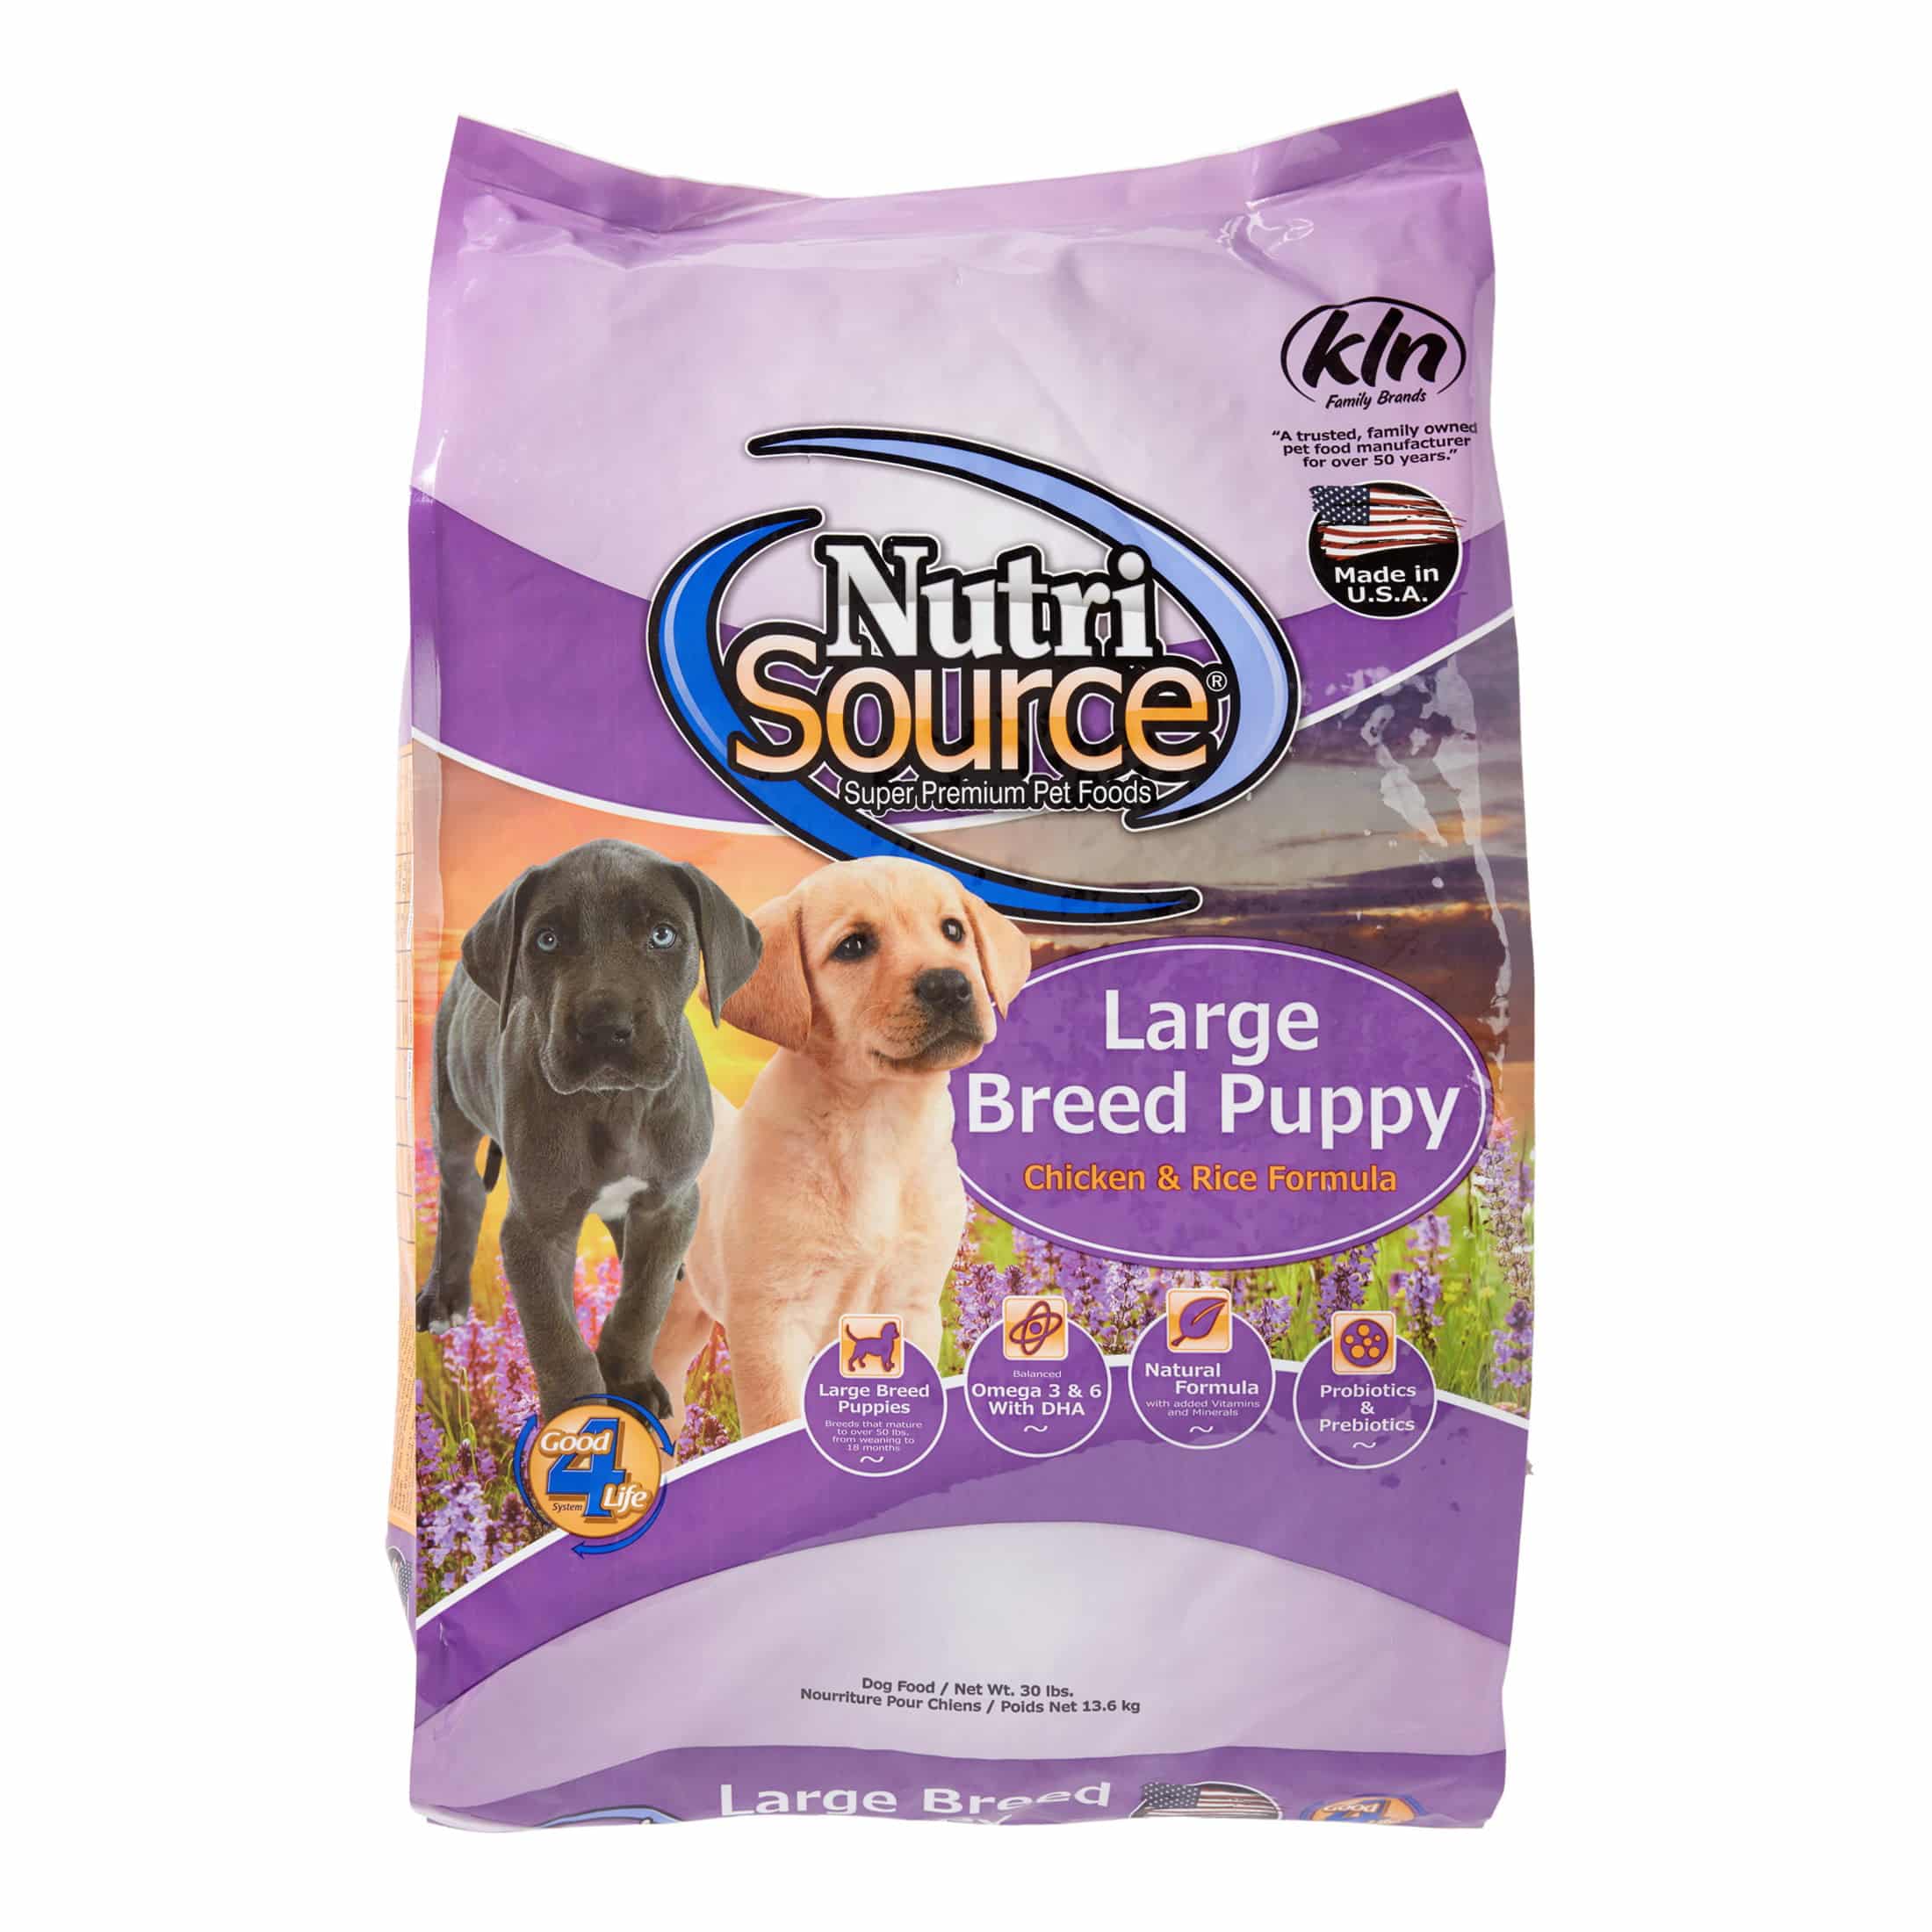 NutriSource Large Breed Puppy Dry Dog Food, 30 lb